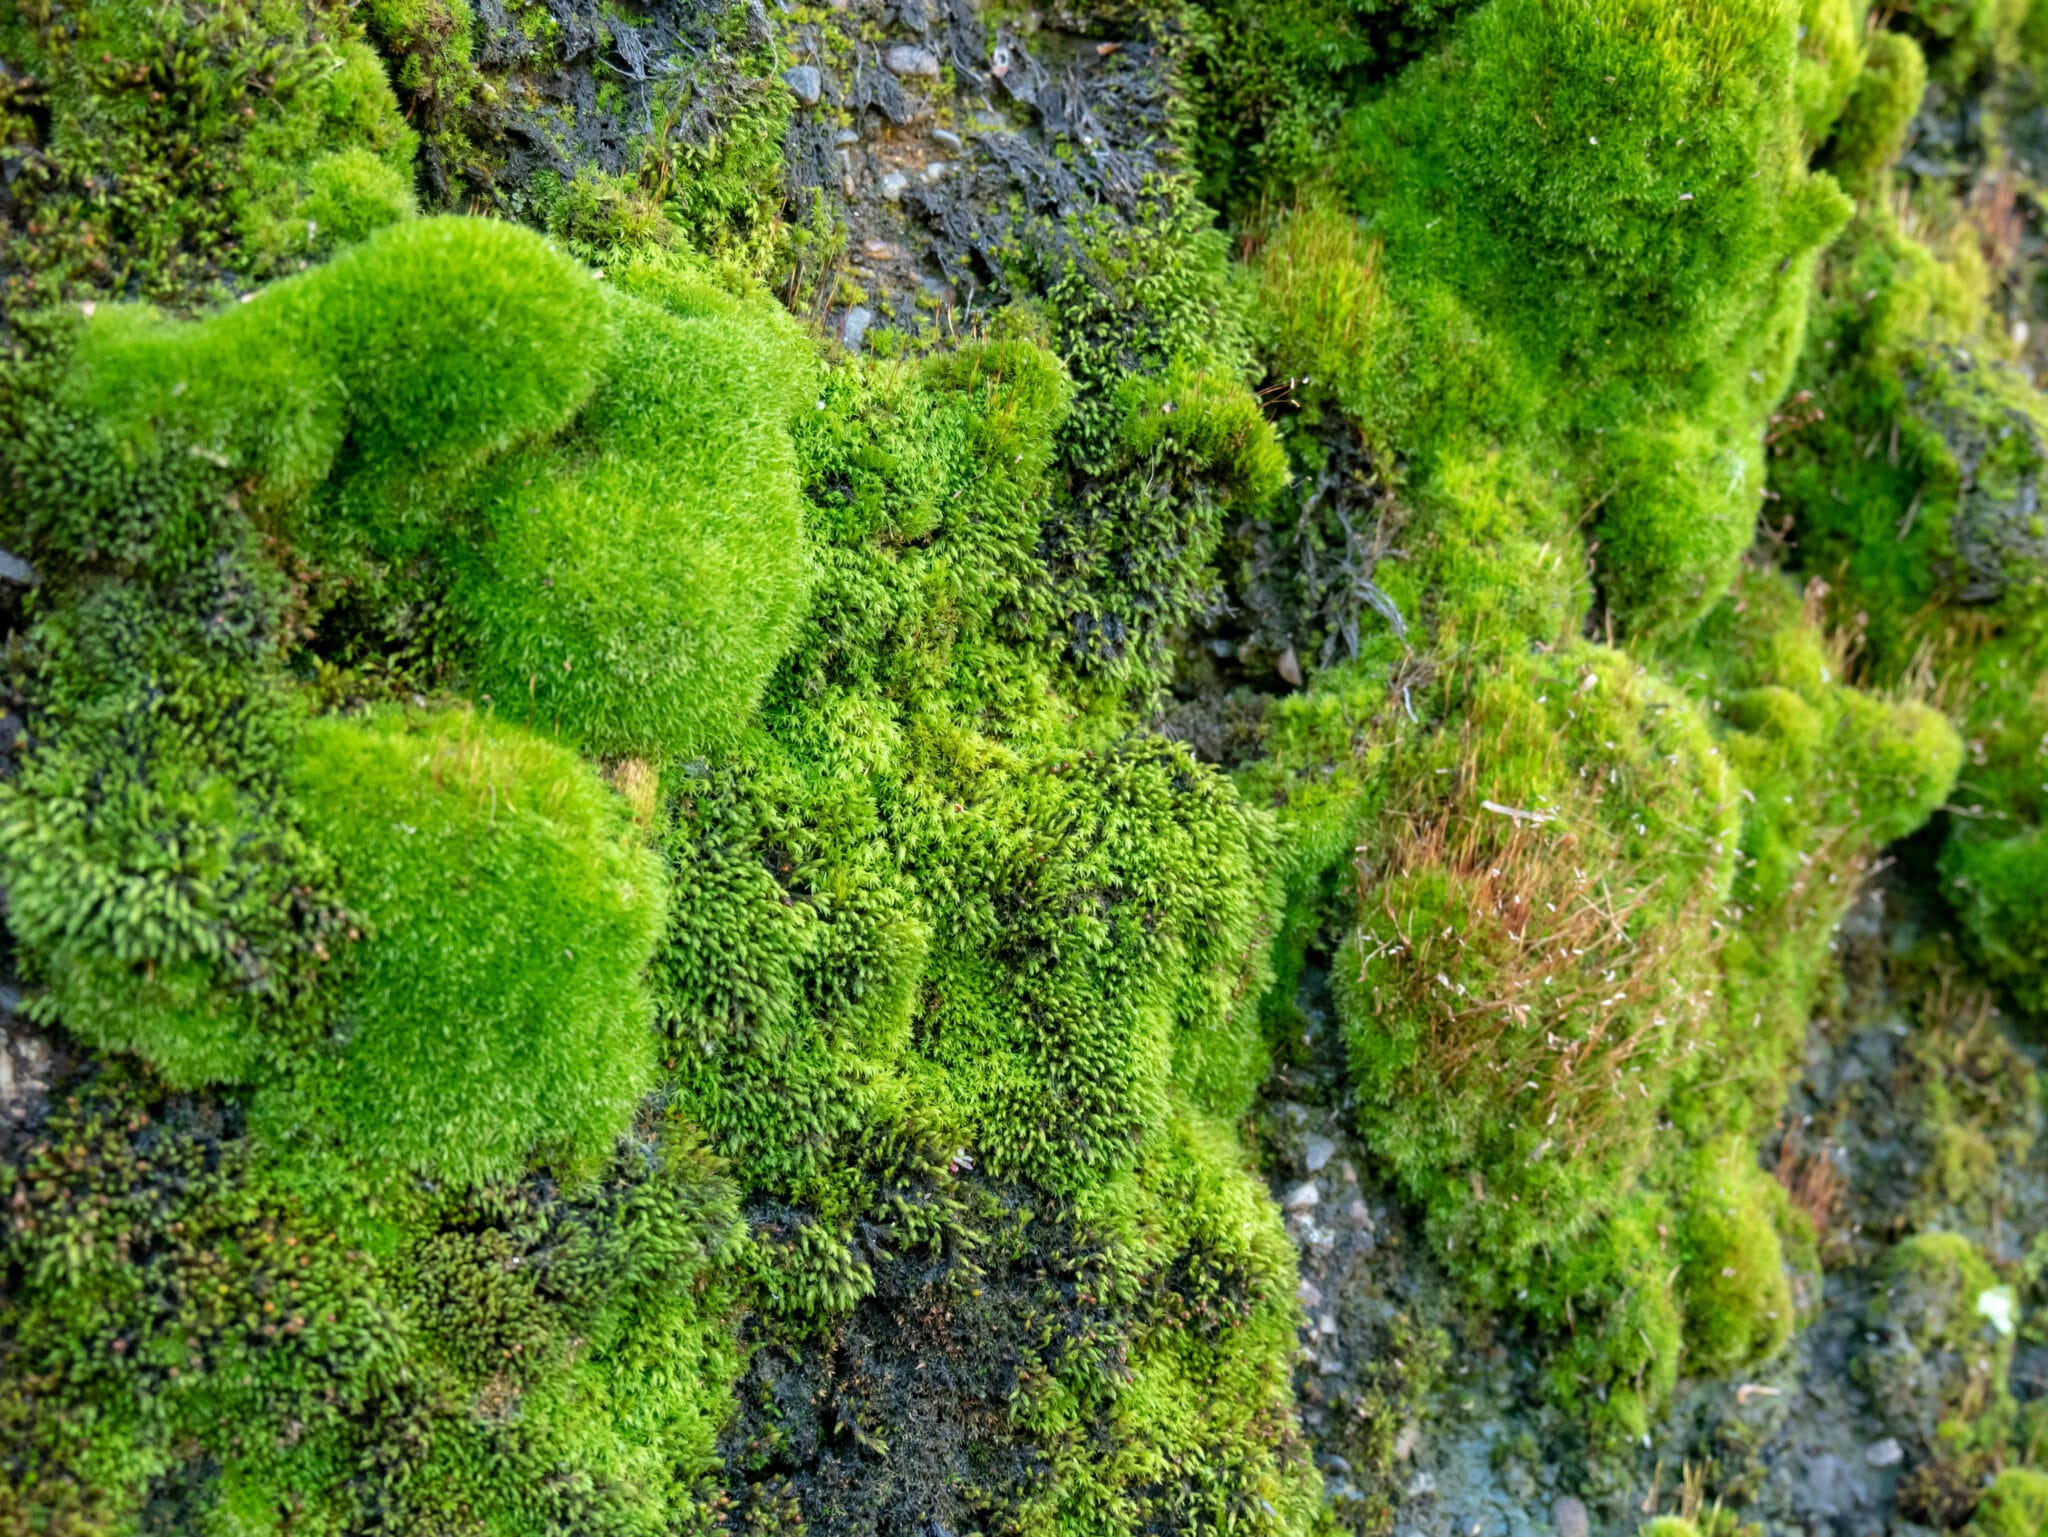 7 interesting things about moss